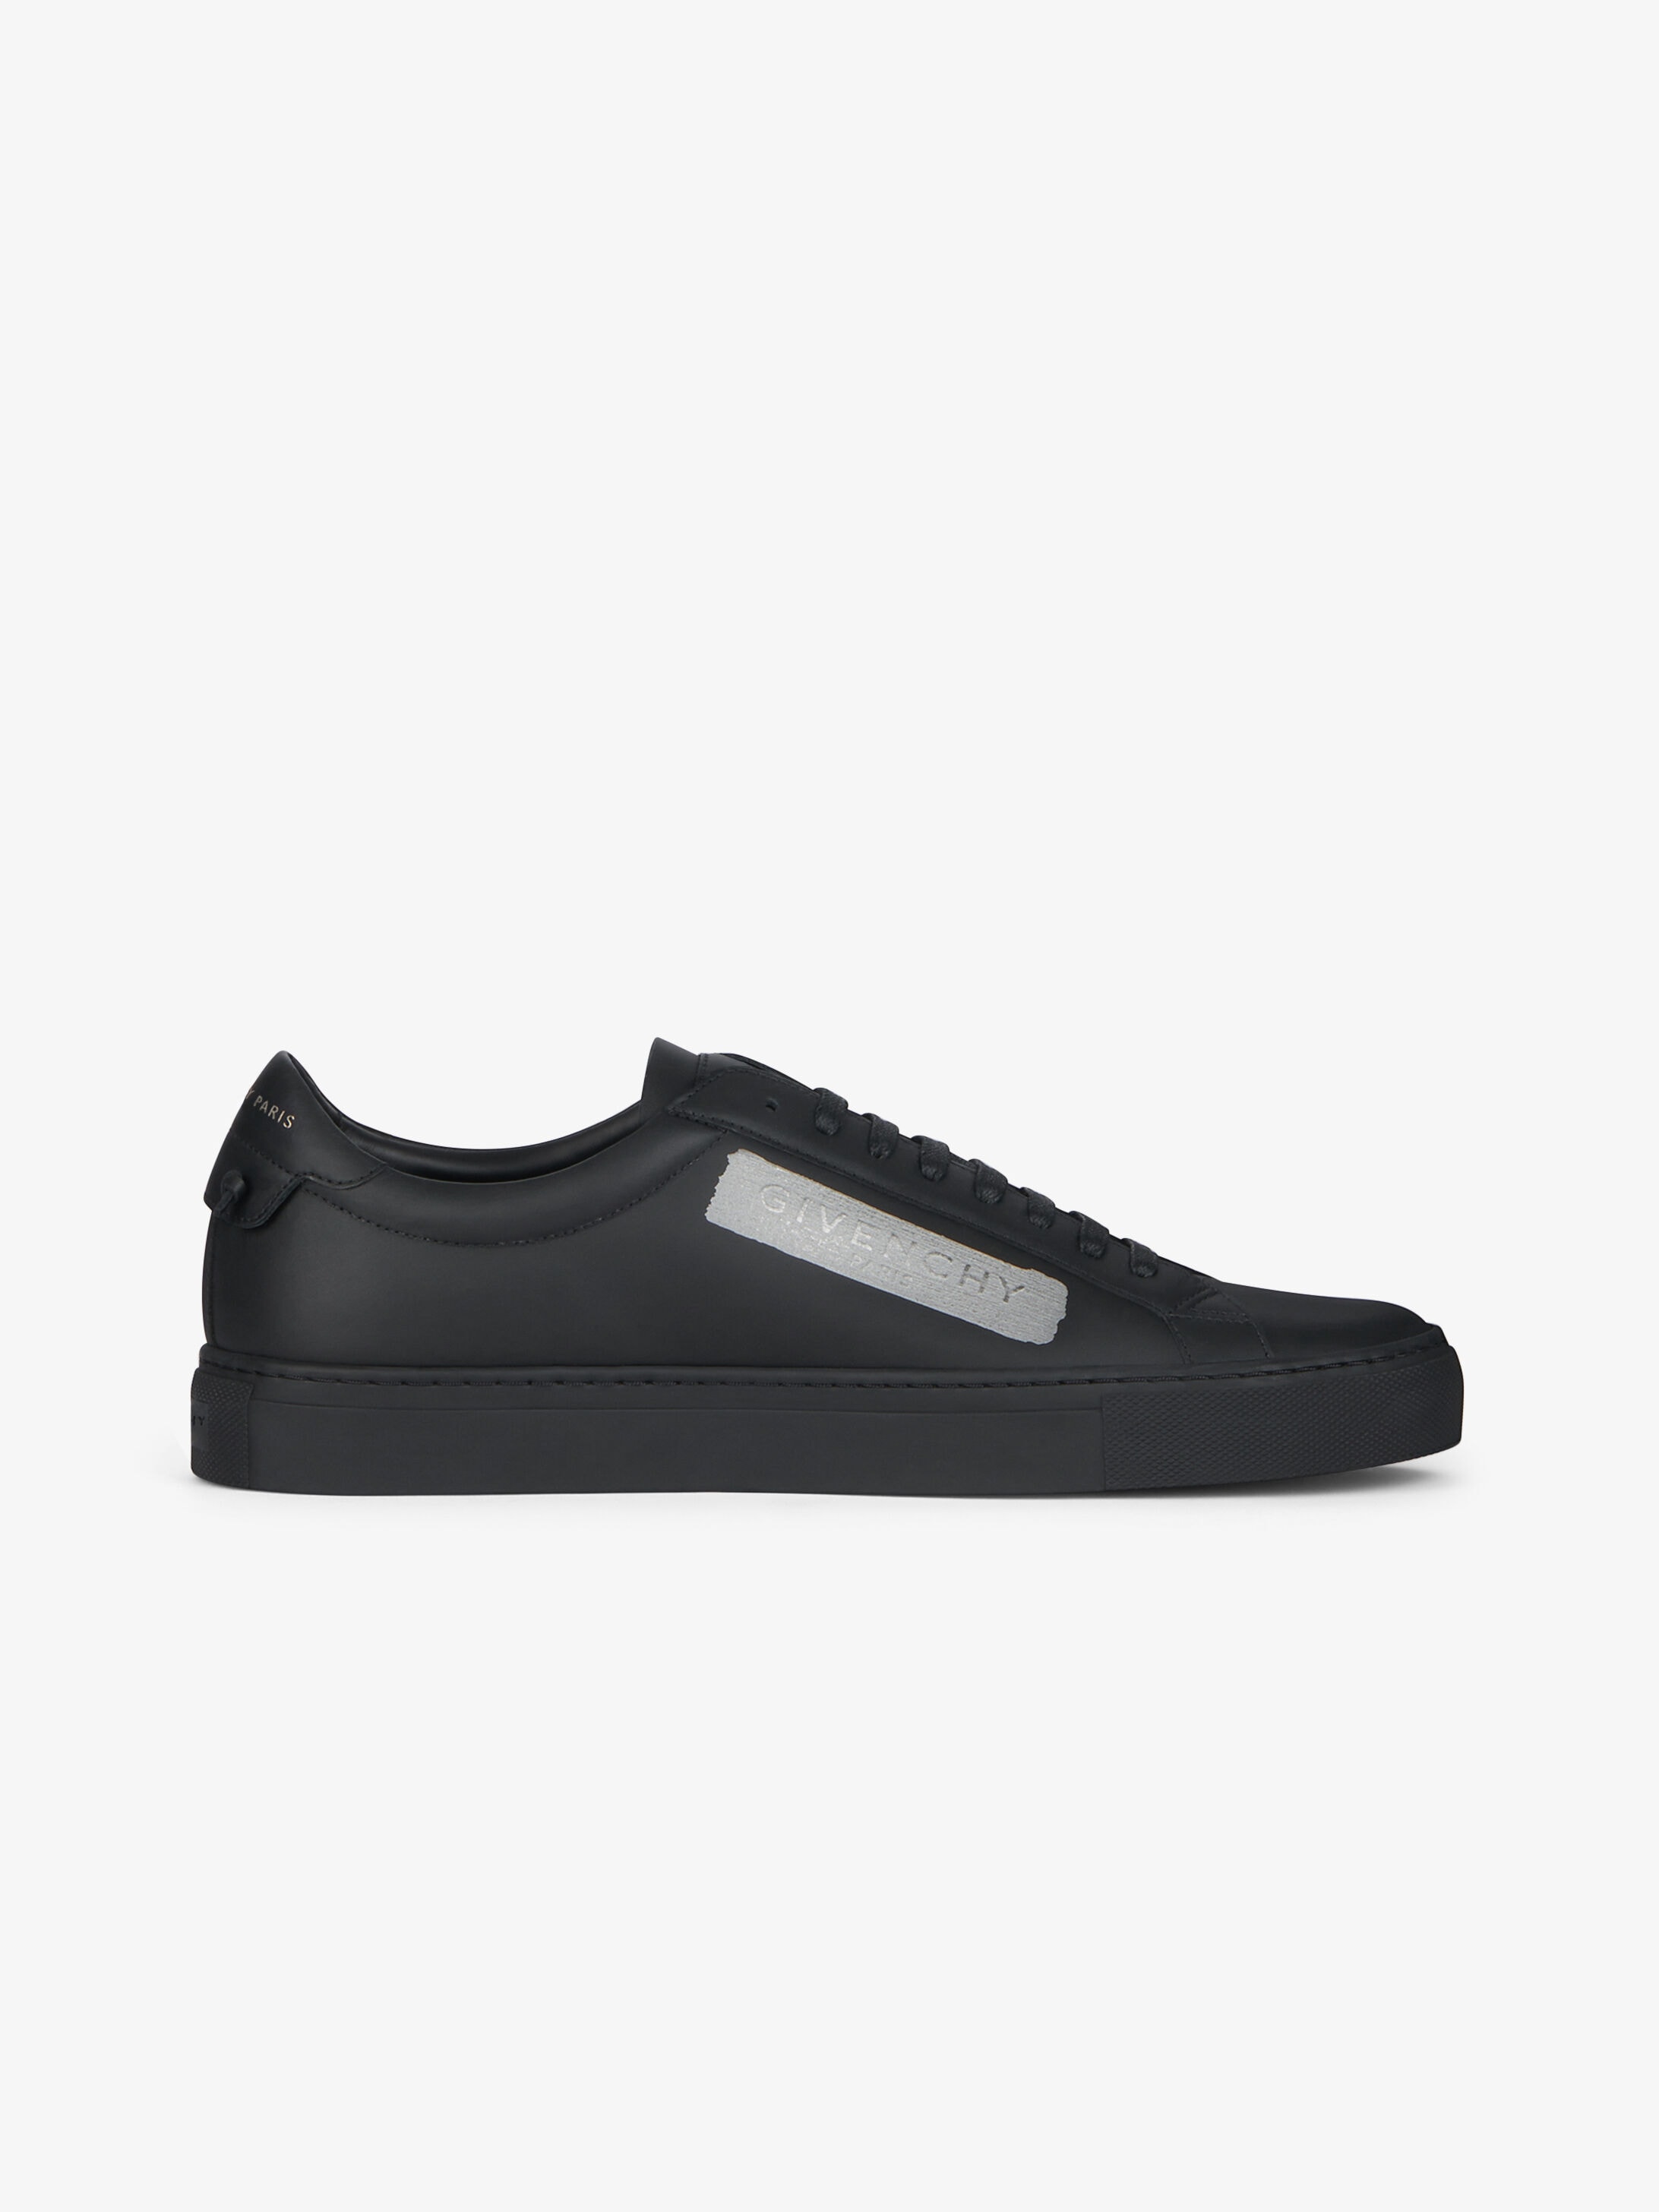 givenchy sneakers price